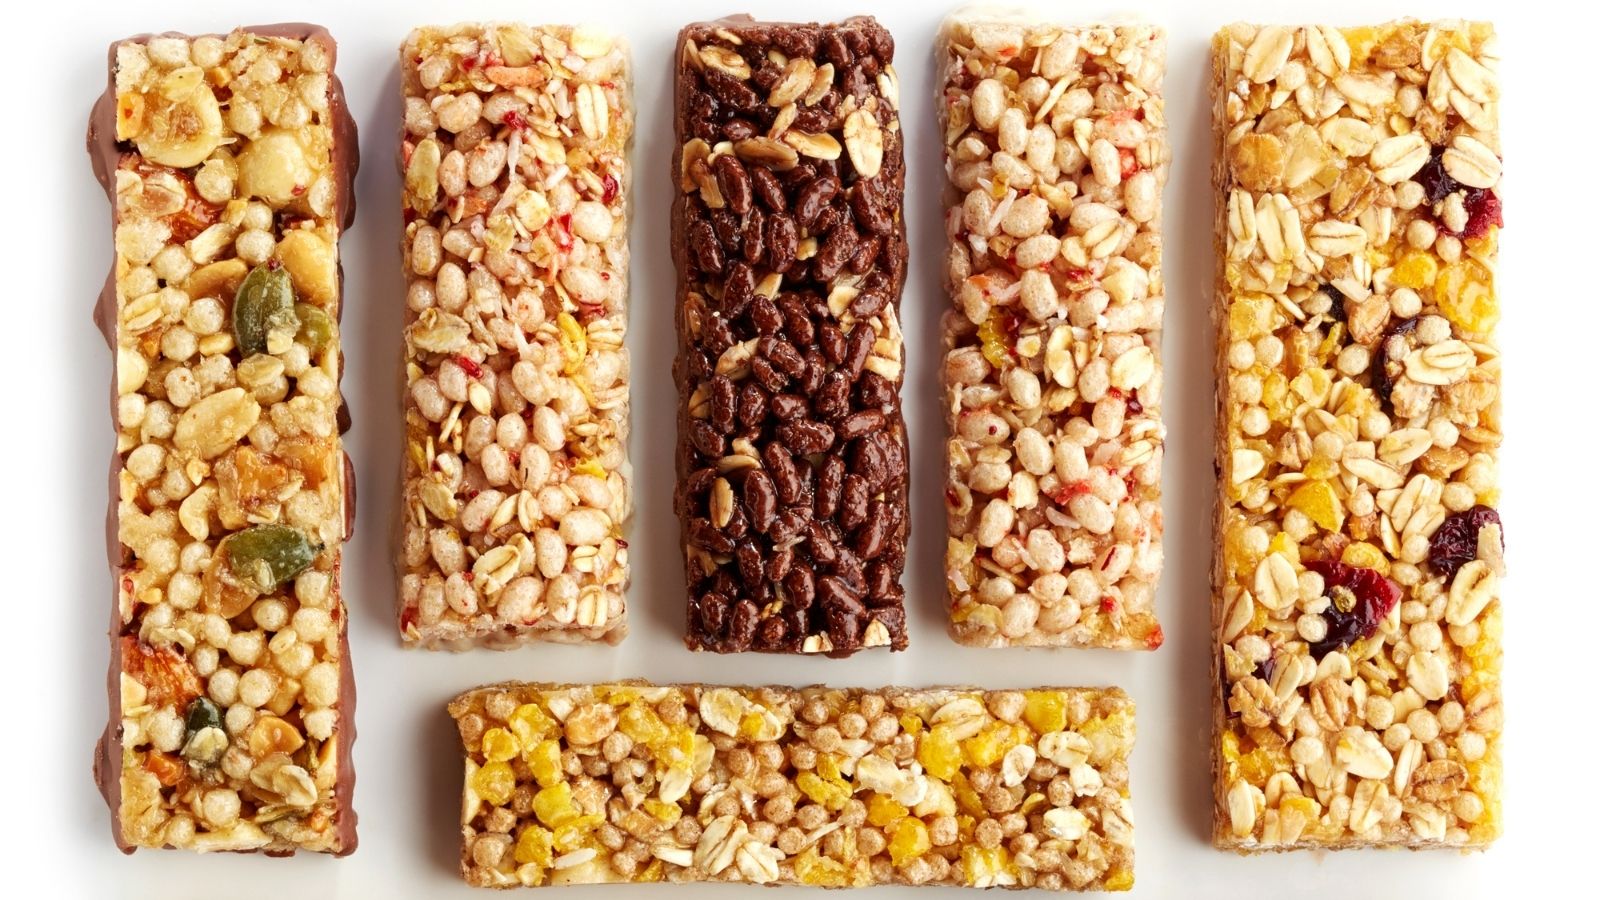 18 Tasty Healthy Snacks for Your Gourmet Kitchen Adventure